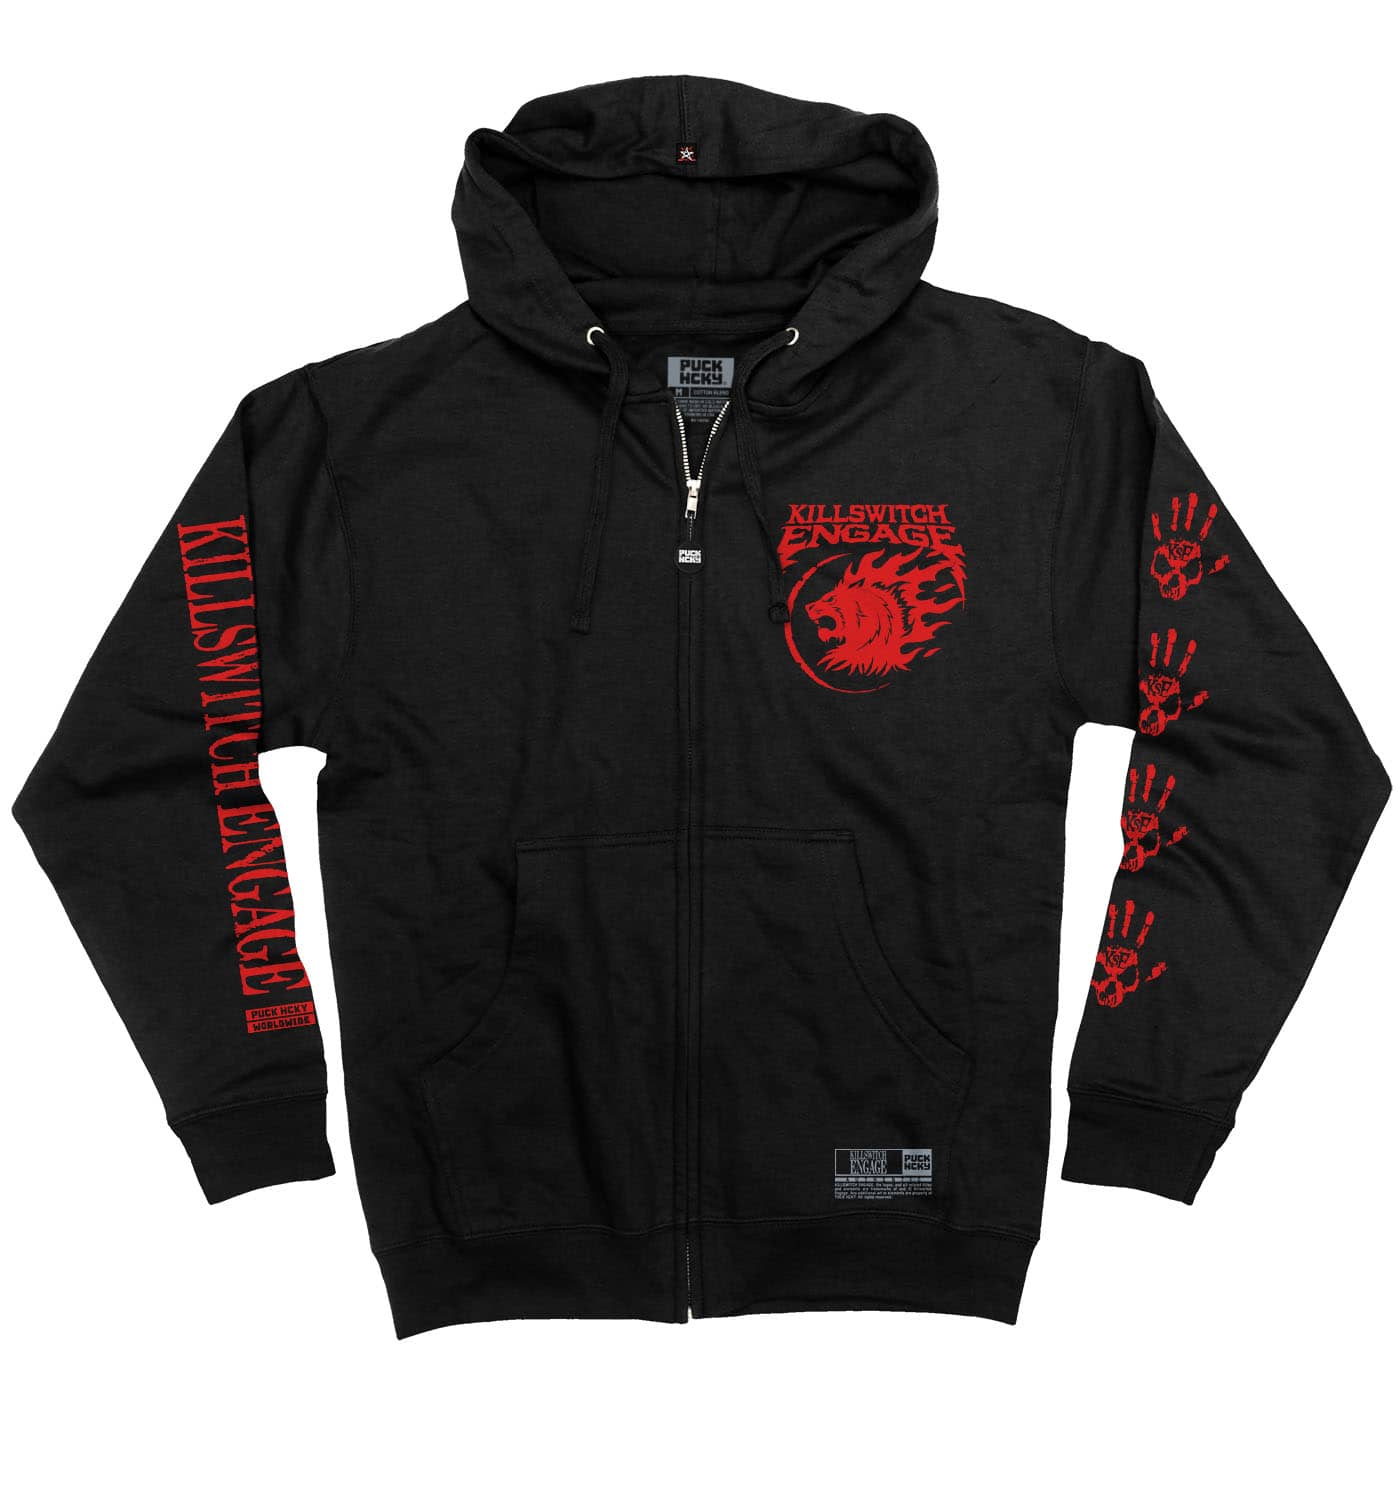 KILLSWITCH ENGAGE ‘SKATE BY DESIGN’ full zip hockey hoodie in black front view